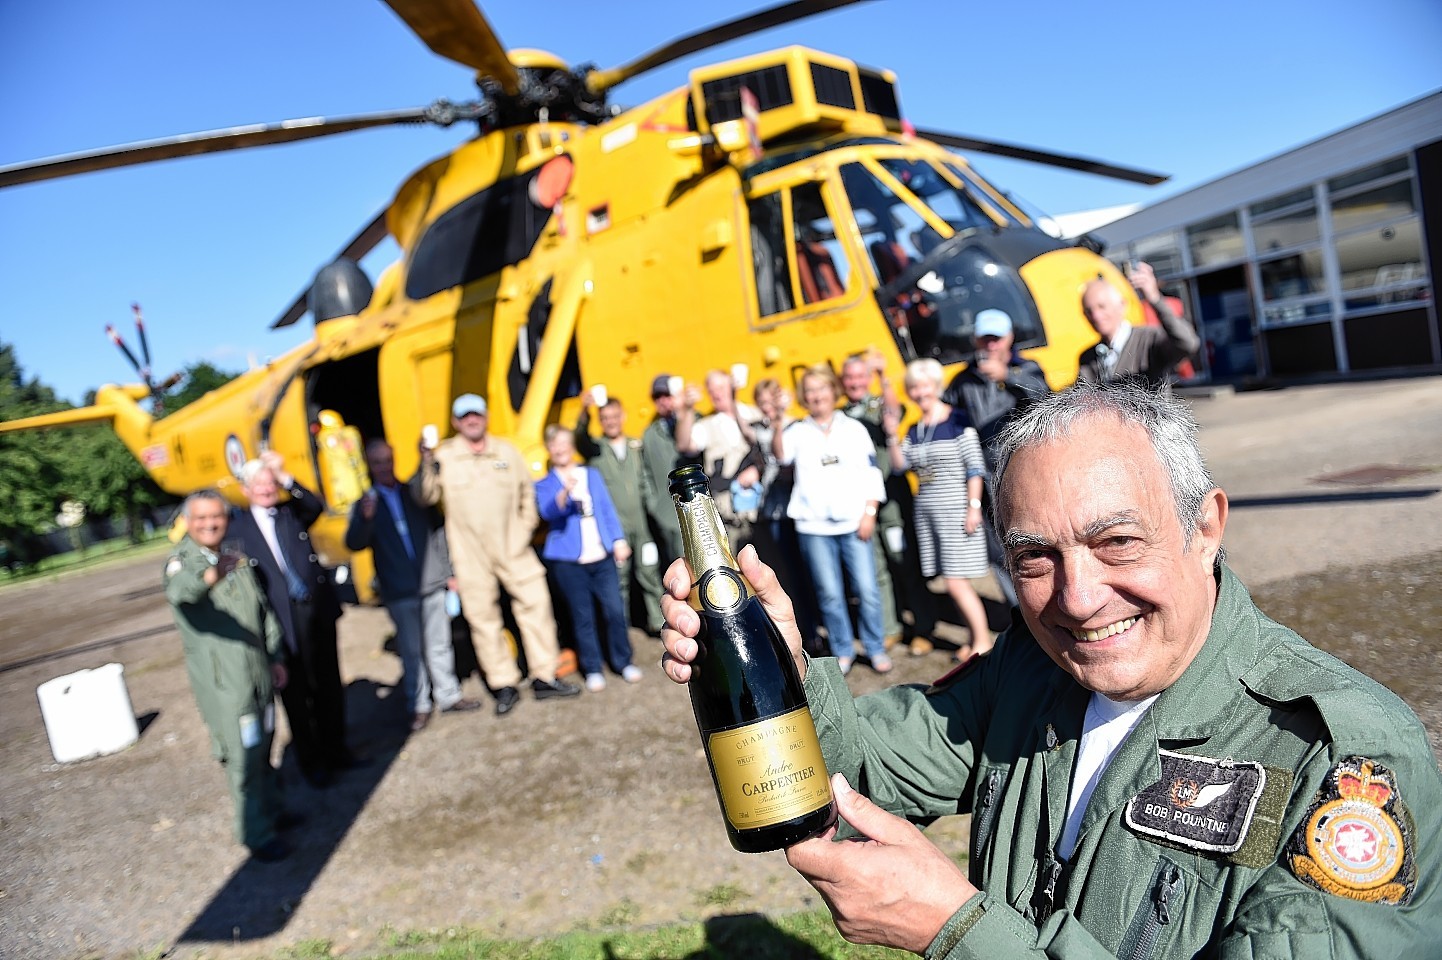 Morayvia director, Bob Pountney, breaks out the champagne to celebrate the Sea King being installed at their headquarters in Kinloss.
Picture by Gordon Lennox